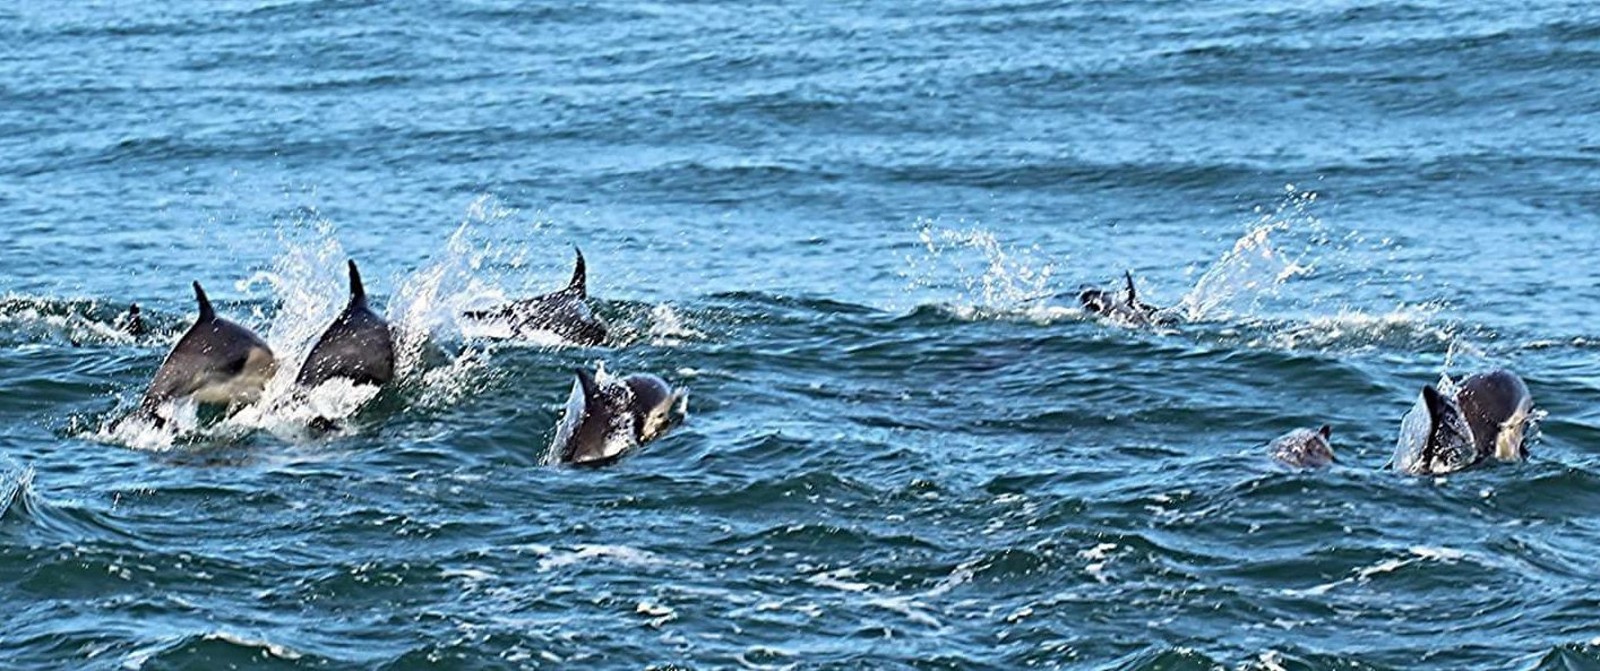 A group of white sided dolphins swimming together in the sea, which is quite choppy.